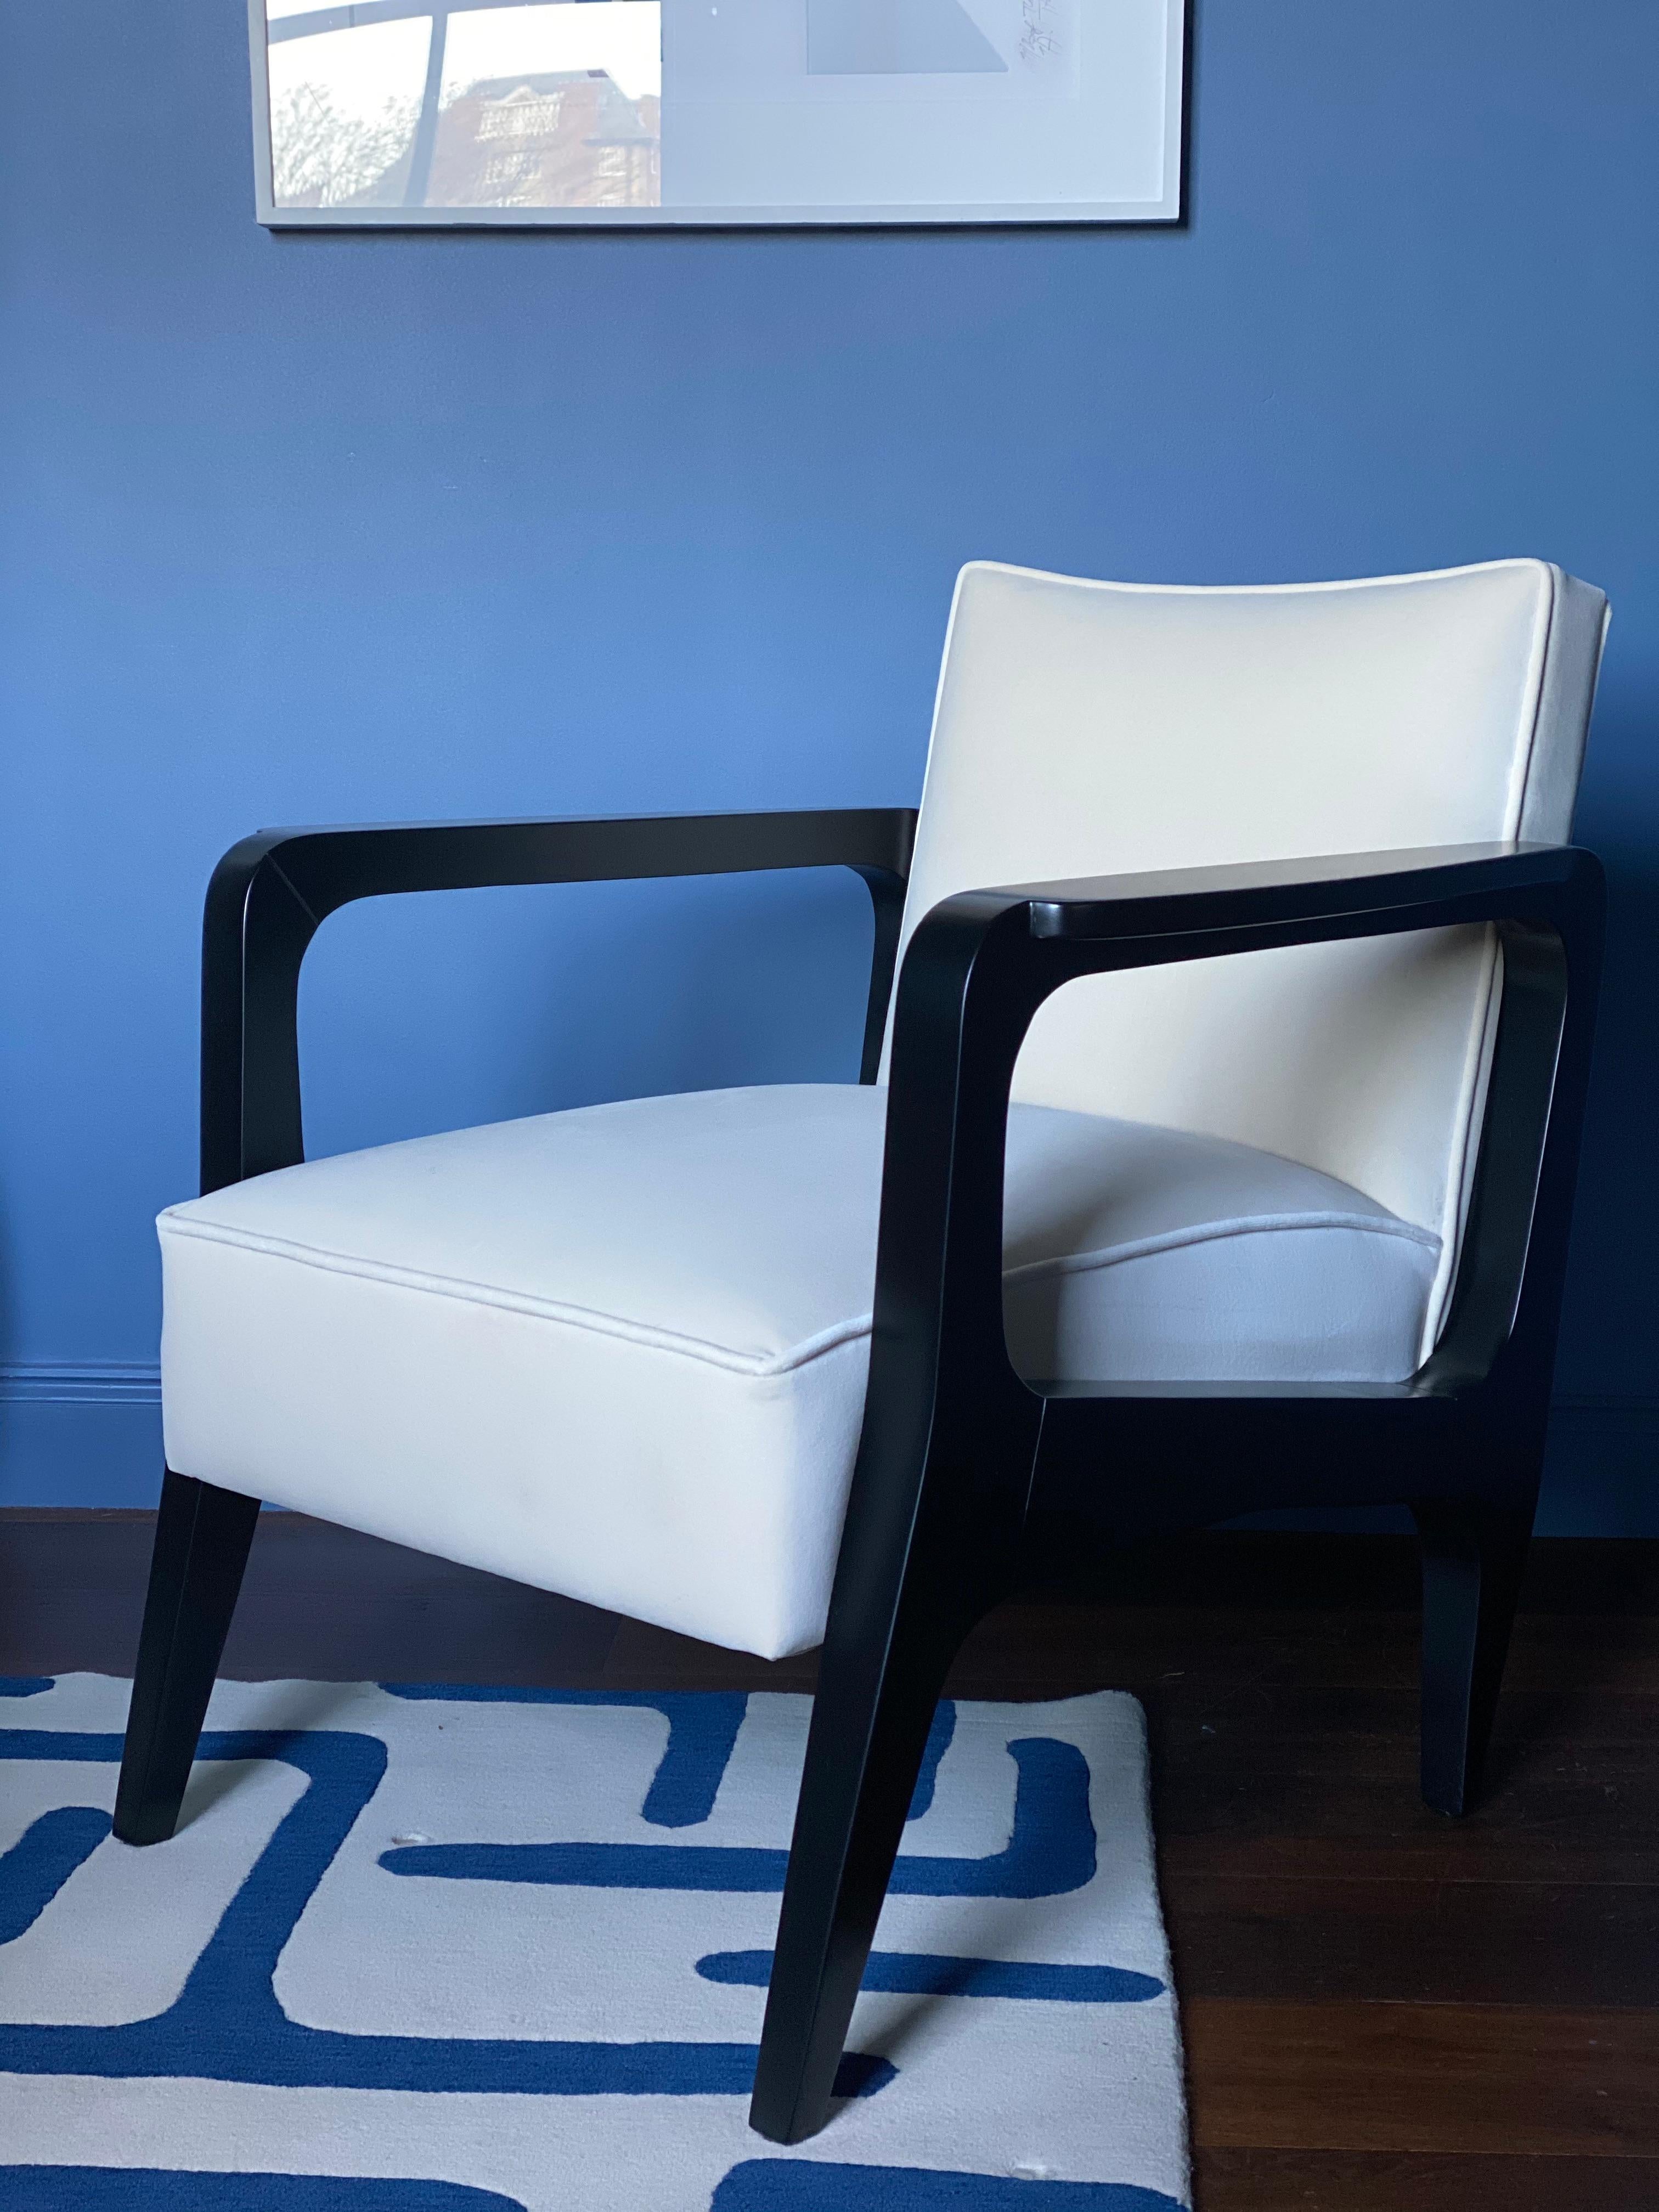 In the modern home, an armchair is no longer just a place to sit and comfortably read your favorite novel, it plays a much larger role in the overall interior aesthetic. Casa Botelho's design philosophy is to ensure that every piece has purpose and